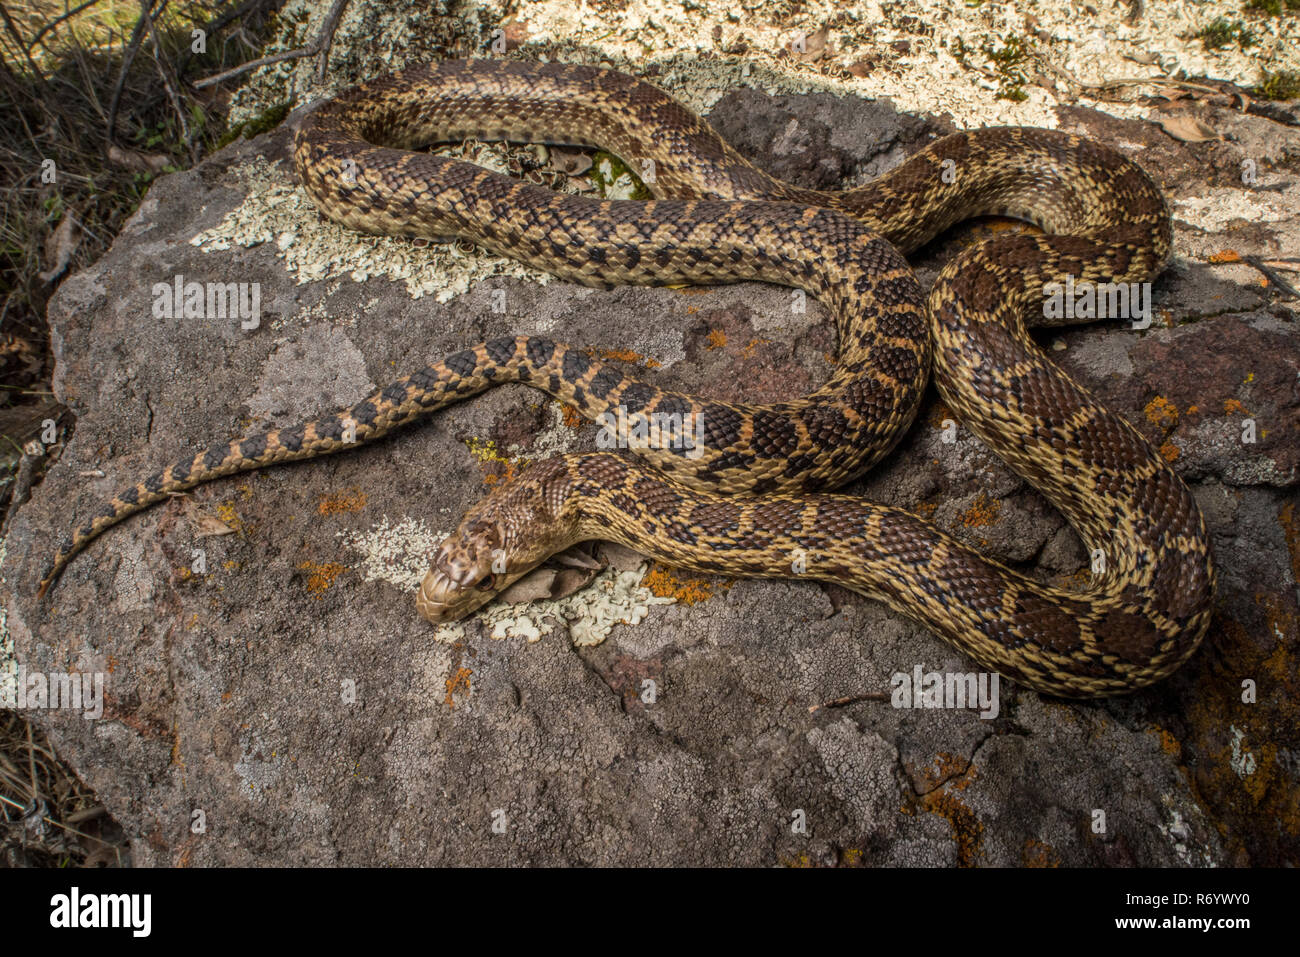 Pacific gopher snake (Pituophis catenifer catenifer) basking in the sun in order to warm up in western California. Stock Photo